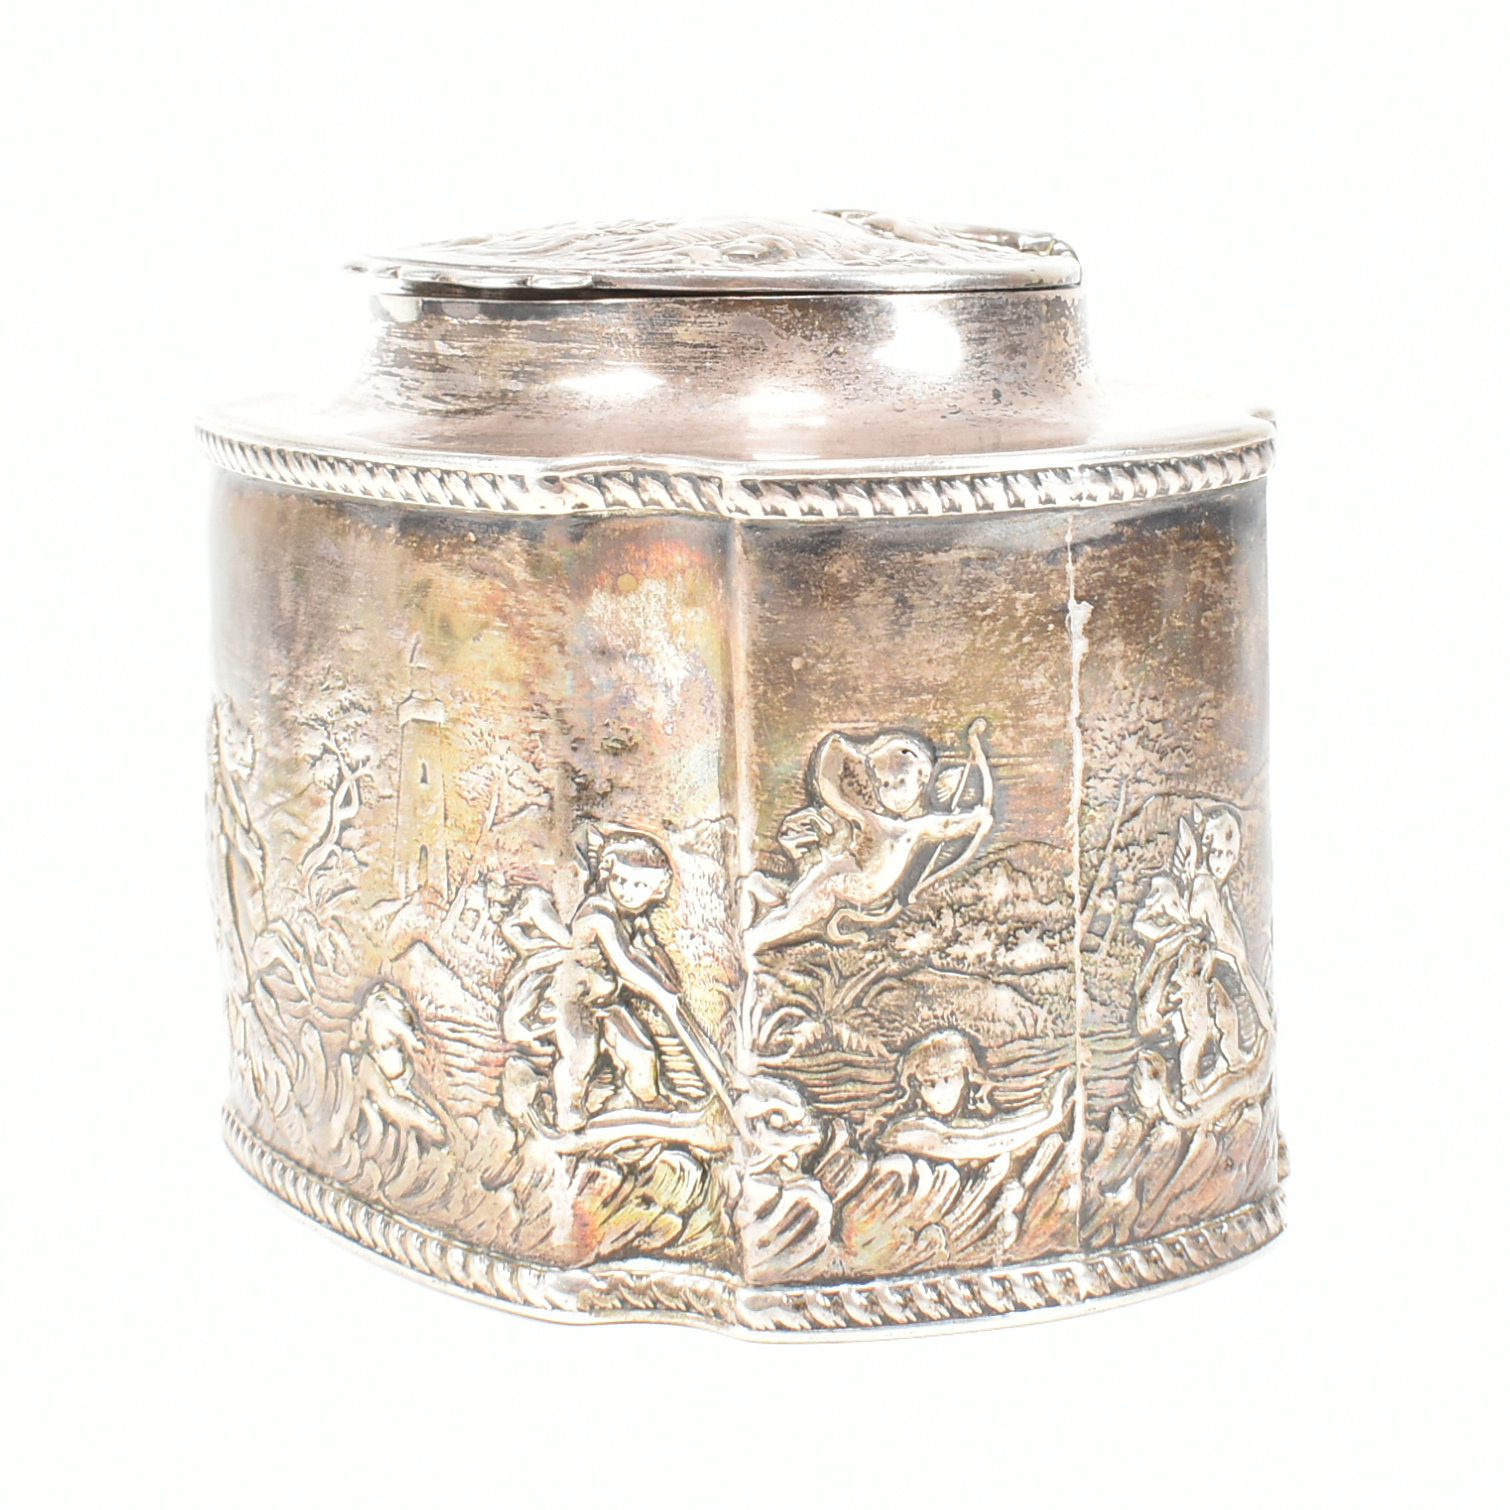 LATE VICTORIAN HALLMARKED SILVER TEA CADDY - Image 5 of 9